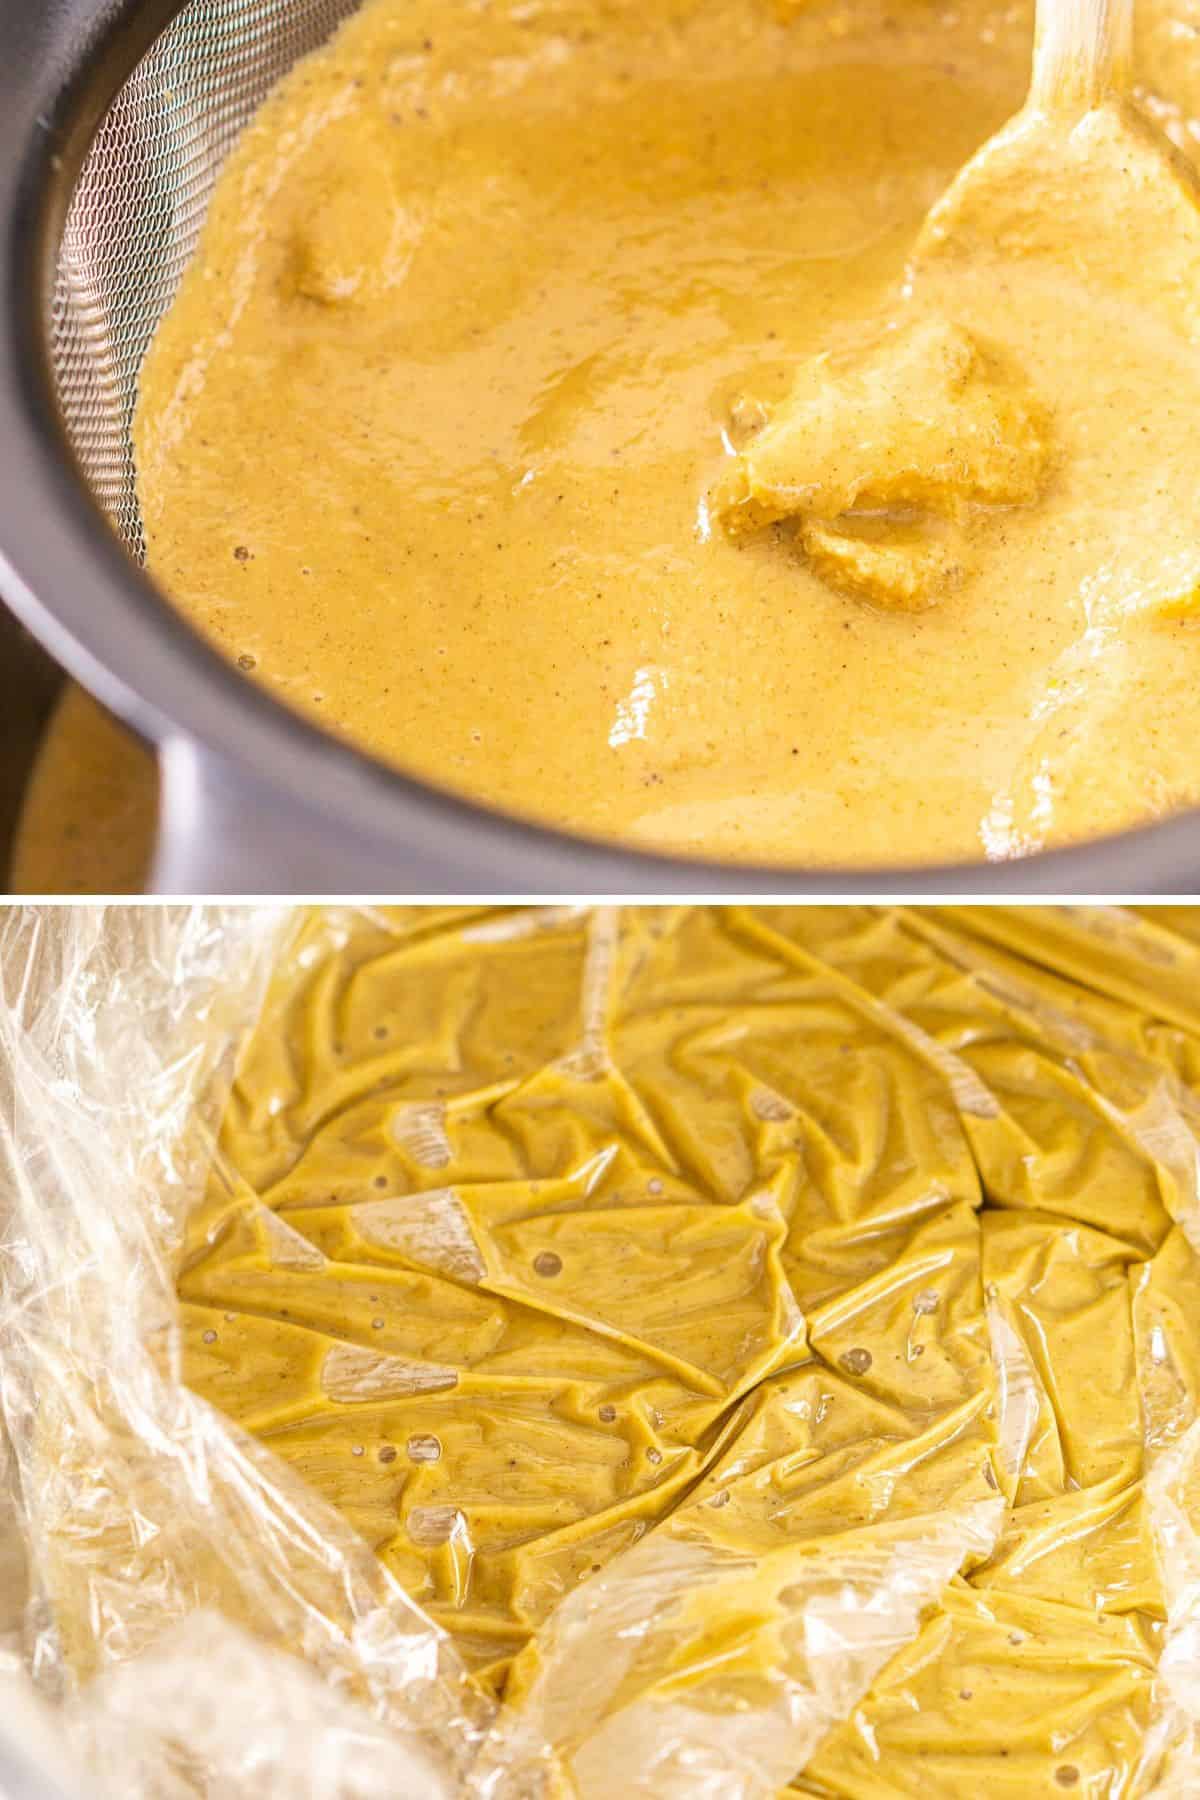 A collage of the process of straining the custard and then covering it with plastic wrap in a large mixing bowl.